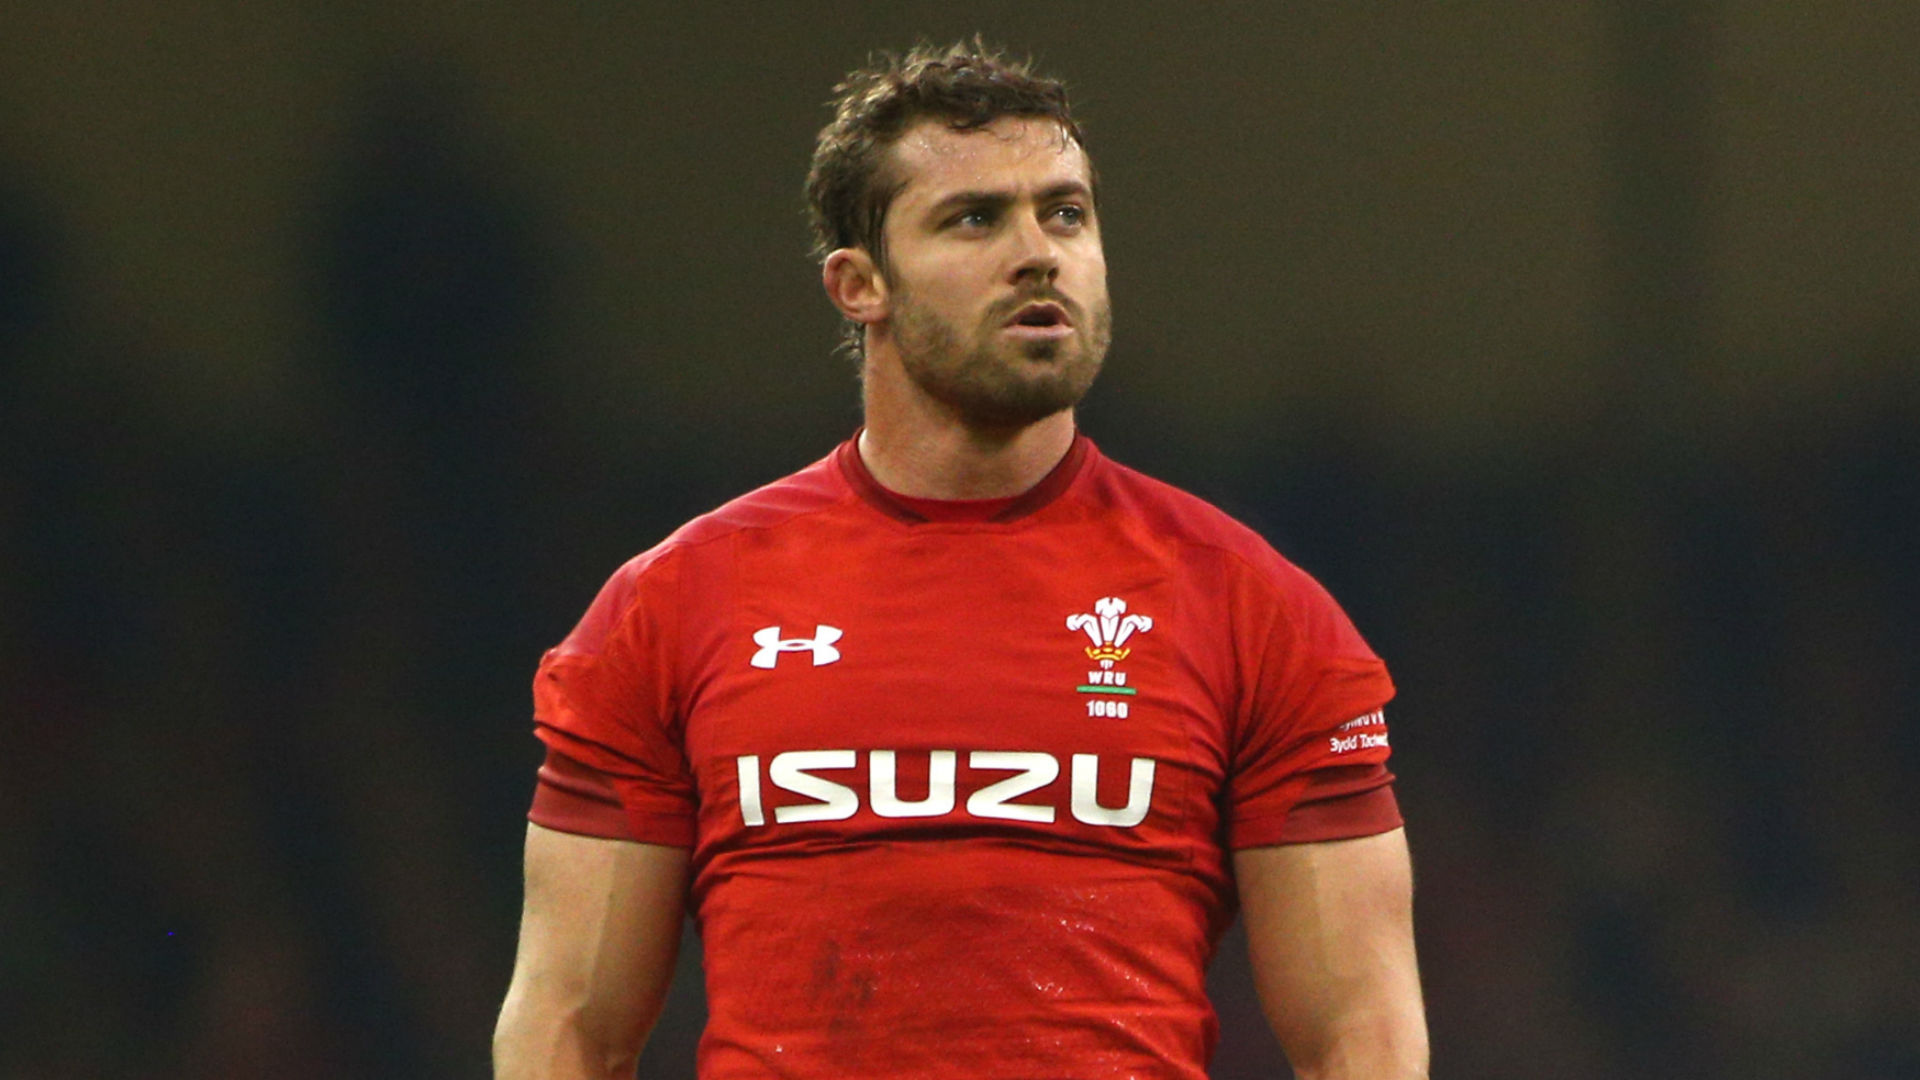 Halfpenny to see specialist as concussion symptoms persist